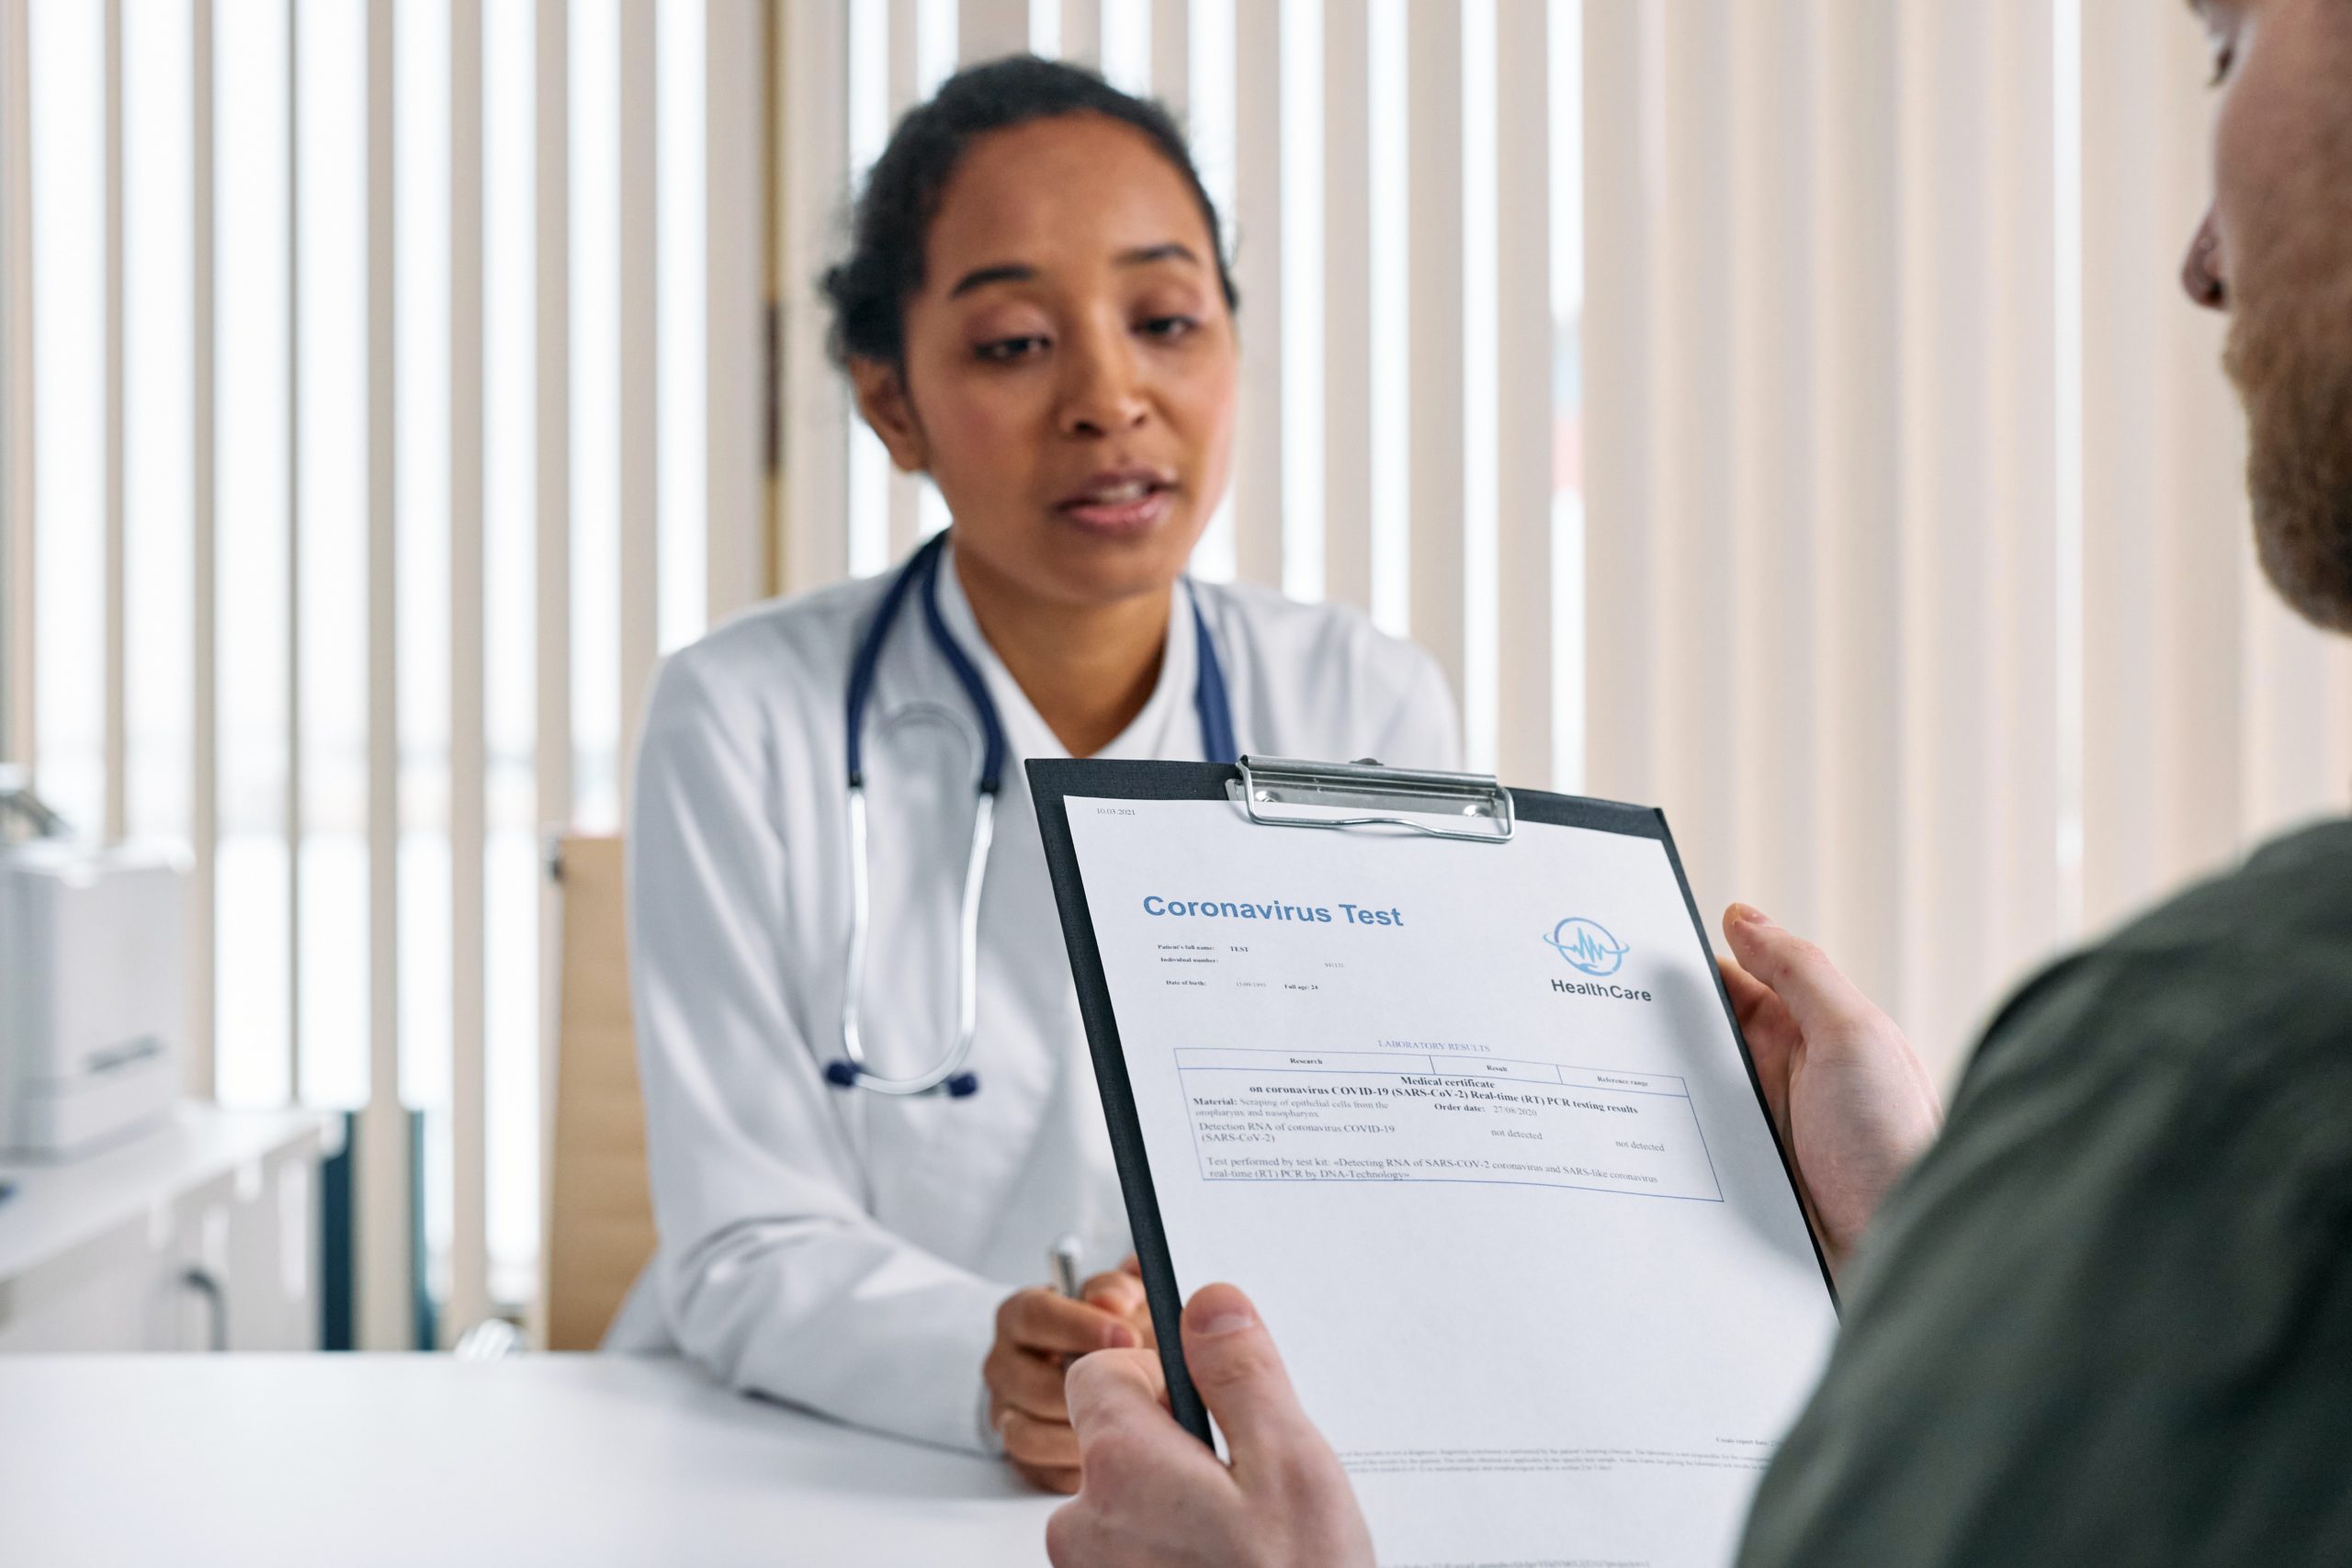 A patient is holding a Coronavirus testing form for a doctor.